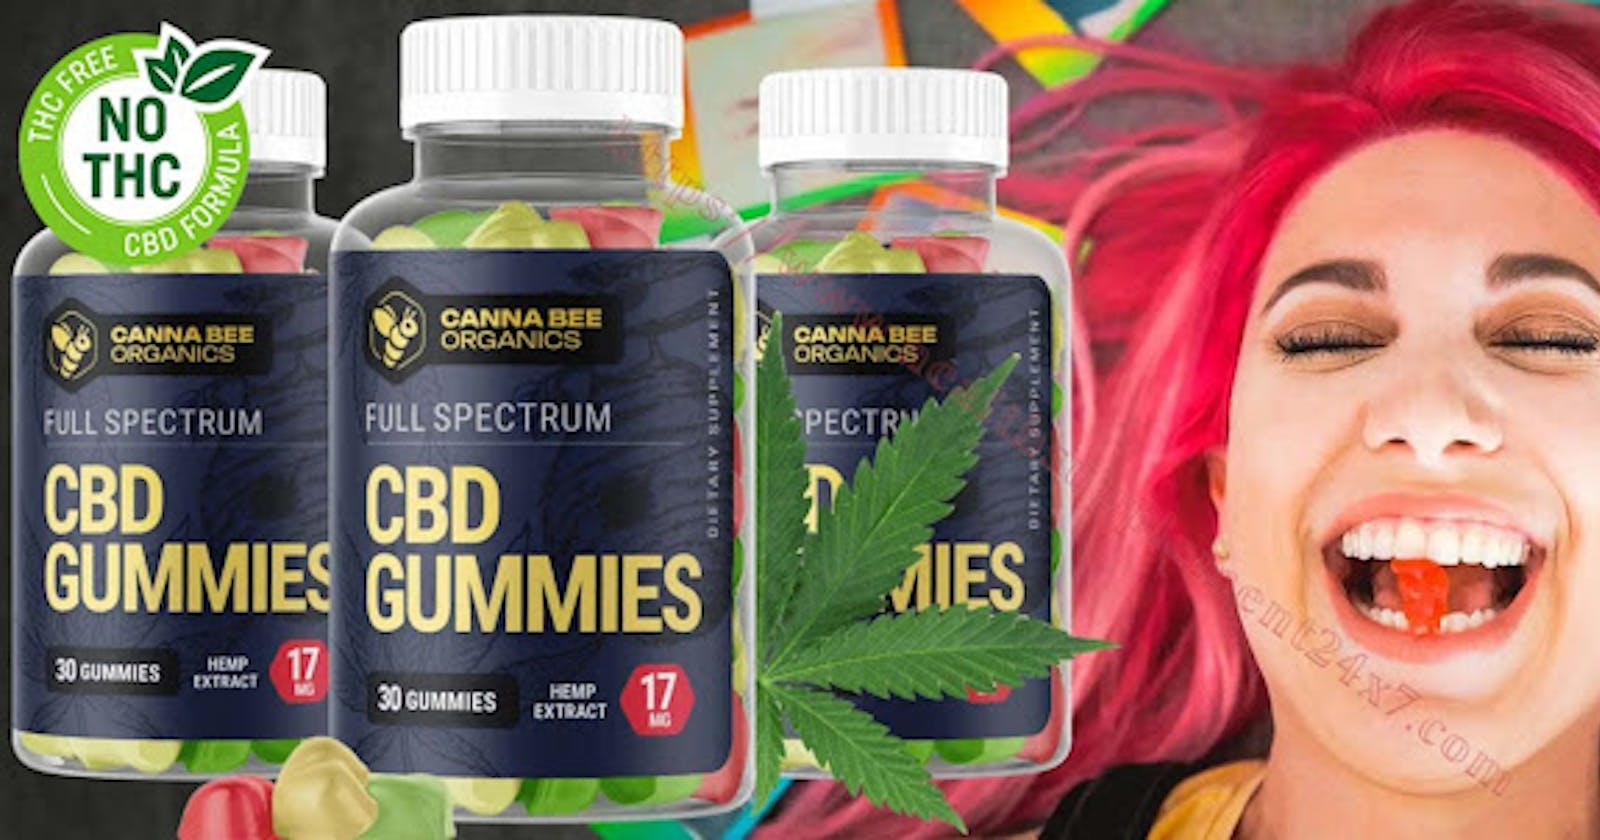 Canna Bee CBD Gummies Reviews, Results, Where To Buy? (UK)